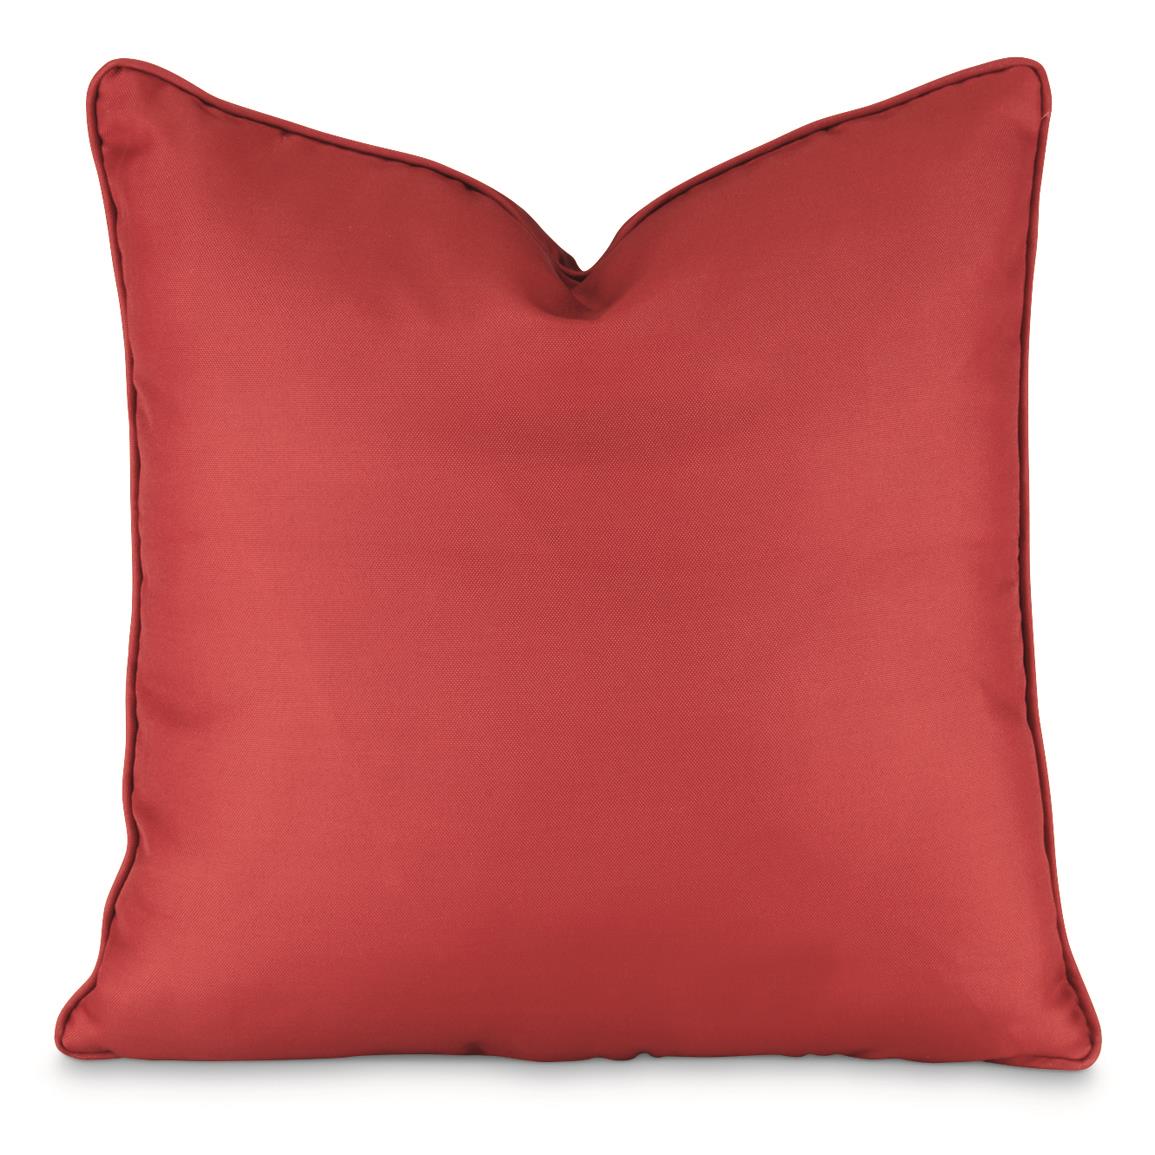 Outdoor Throw Pillow, Red